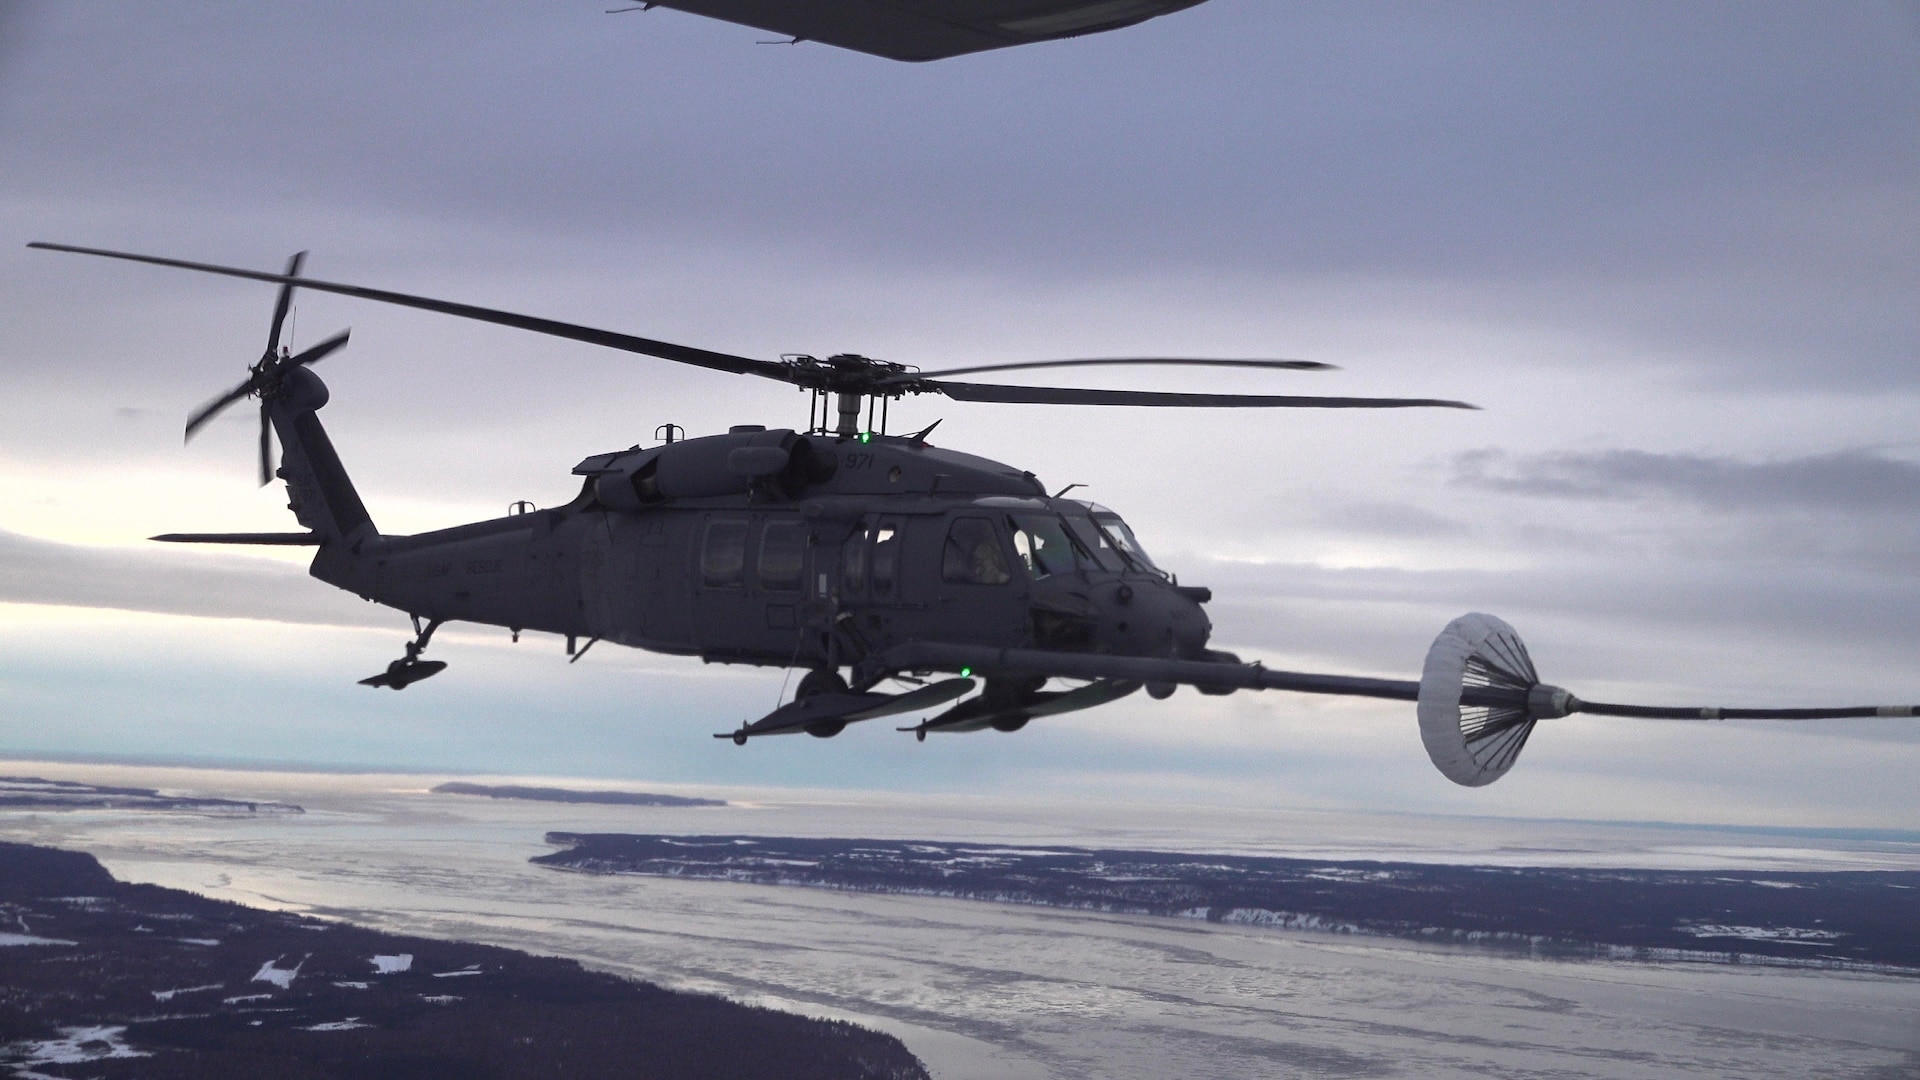 Members of the 210th and 211th Rescue Squadrons, Alaska National Guard, practice aerial refueling in an HH-60G Pave Hawk helicopter over Alaska Jan. 21, 2021. This practice helped prepare members of the unit to execute future rescue missions.